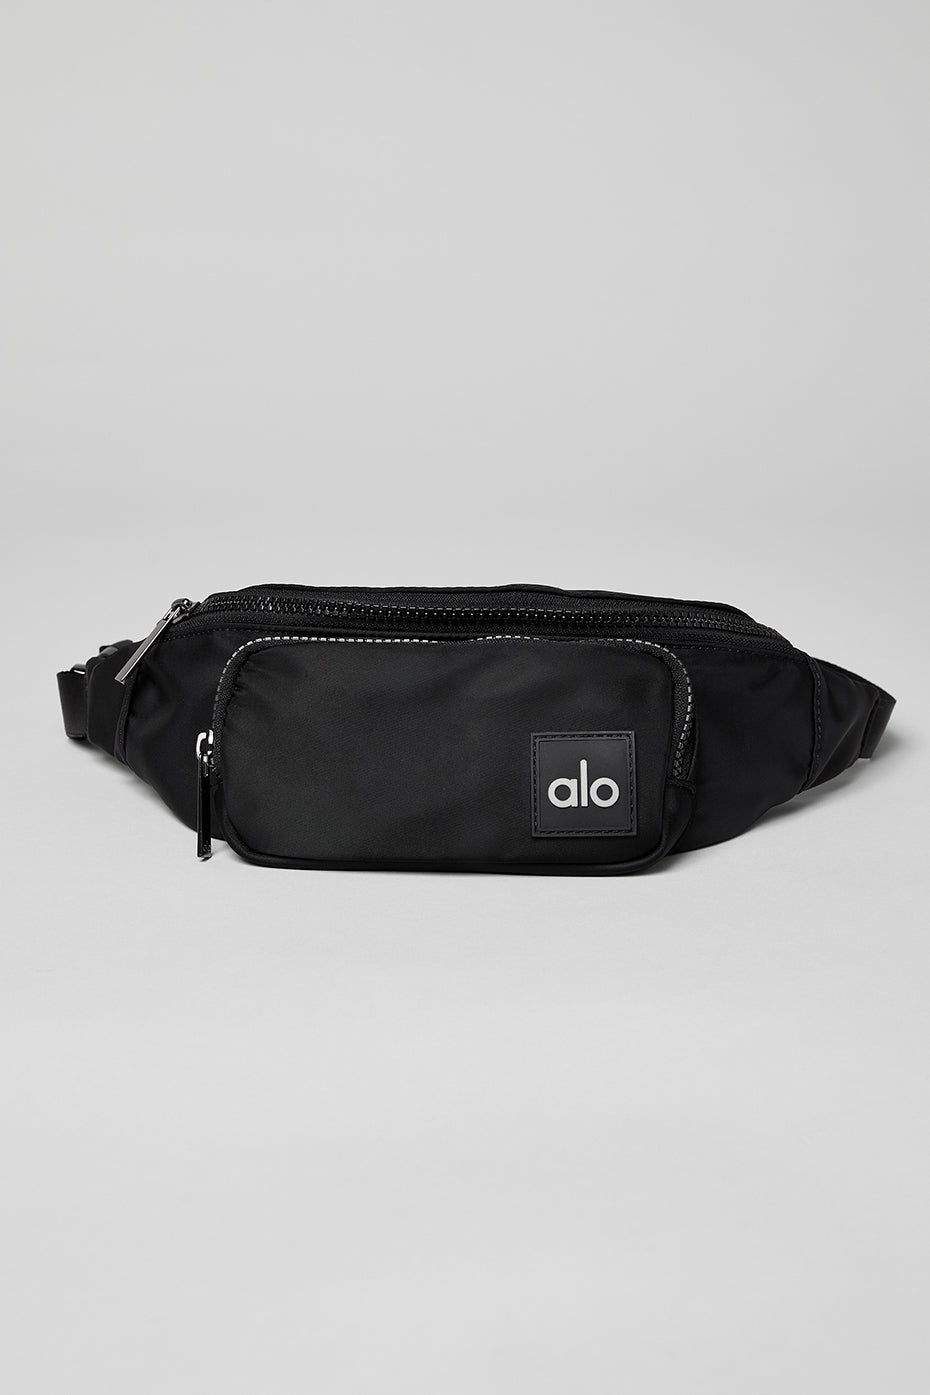 alo stow backpack for yoga, pilates, school, and travel